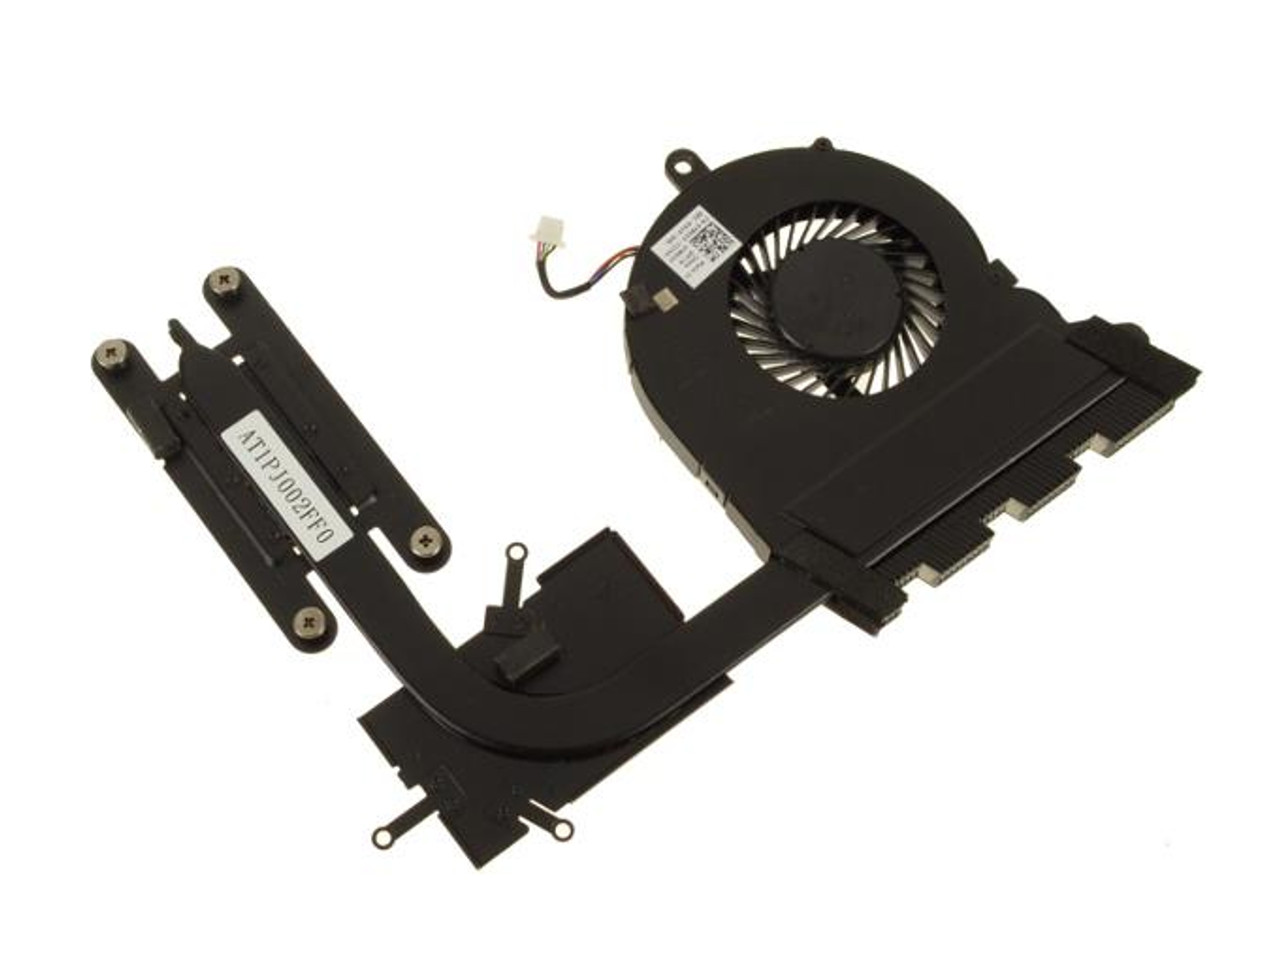 789DY Dell CPU Fan And Heatsink for Inspiron 15 5567